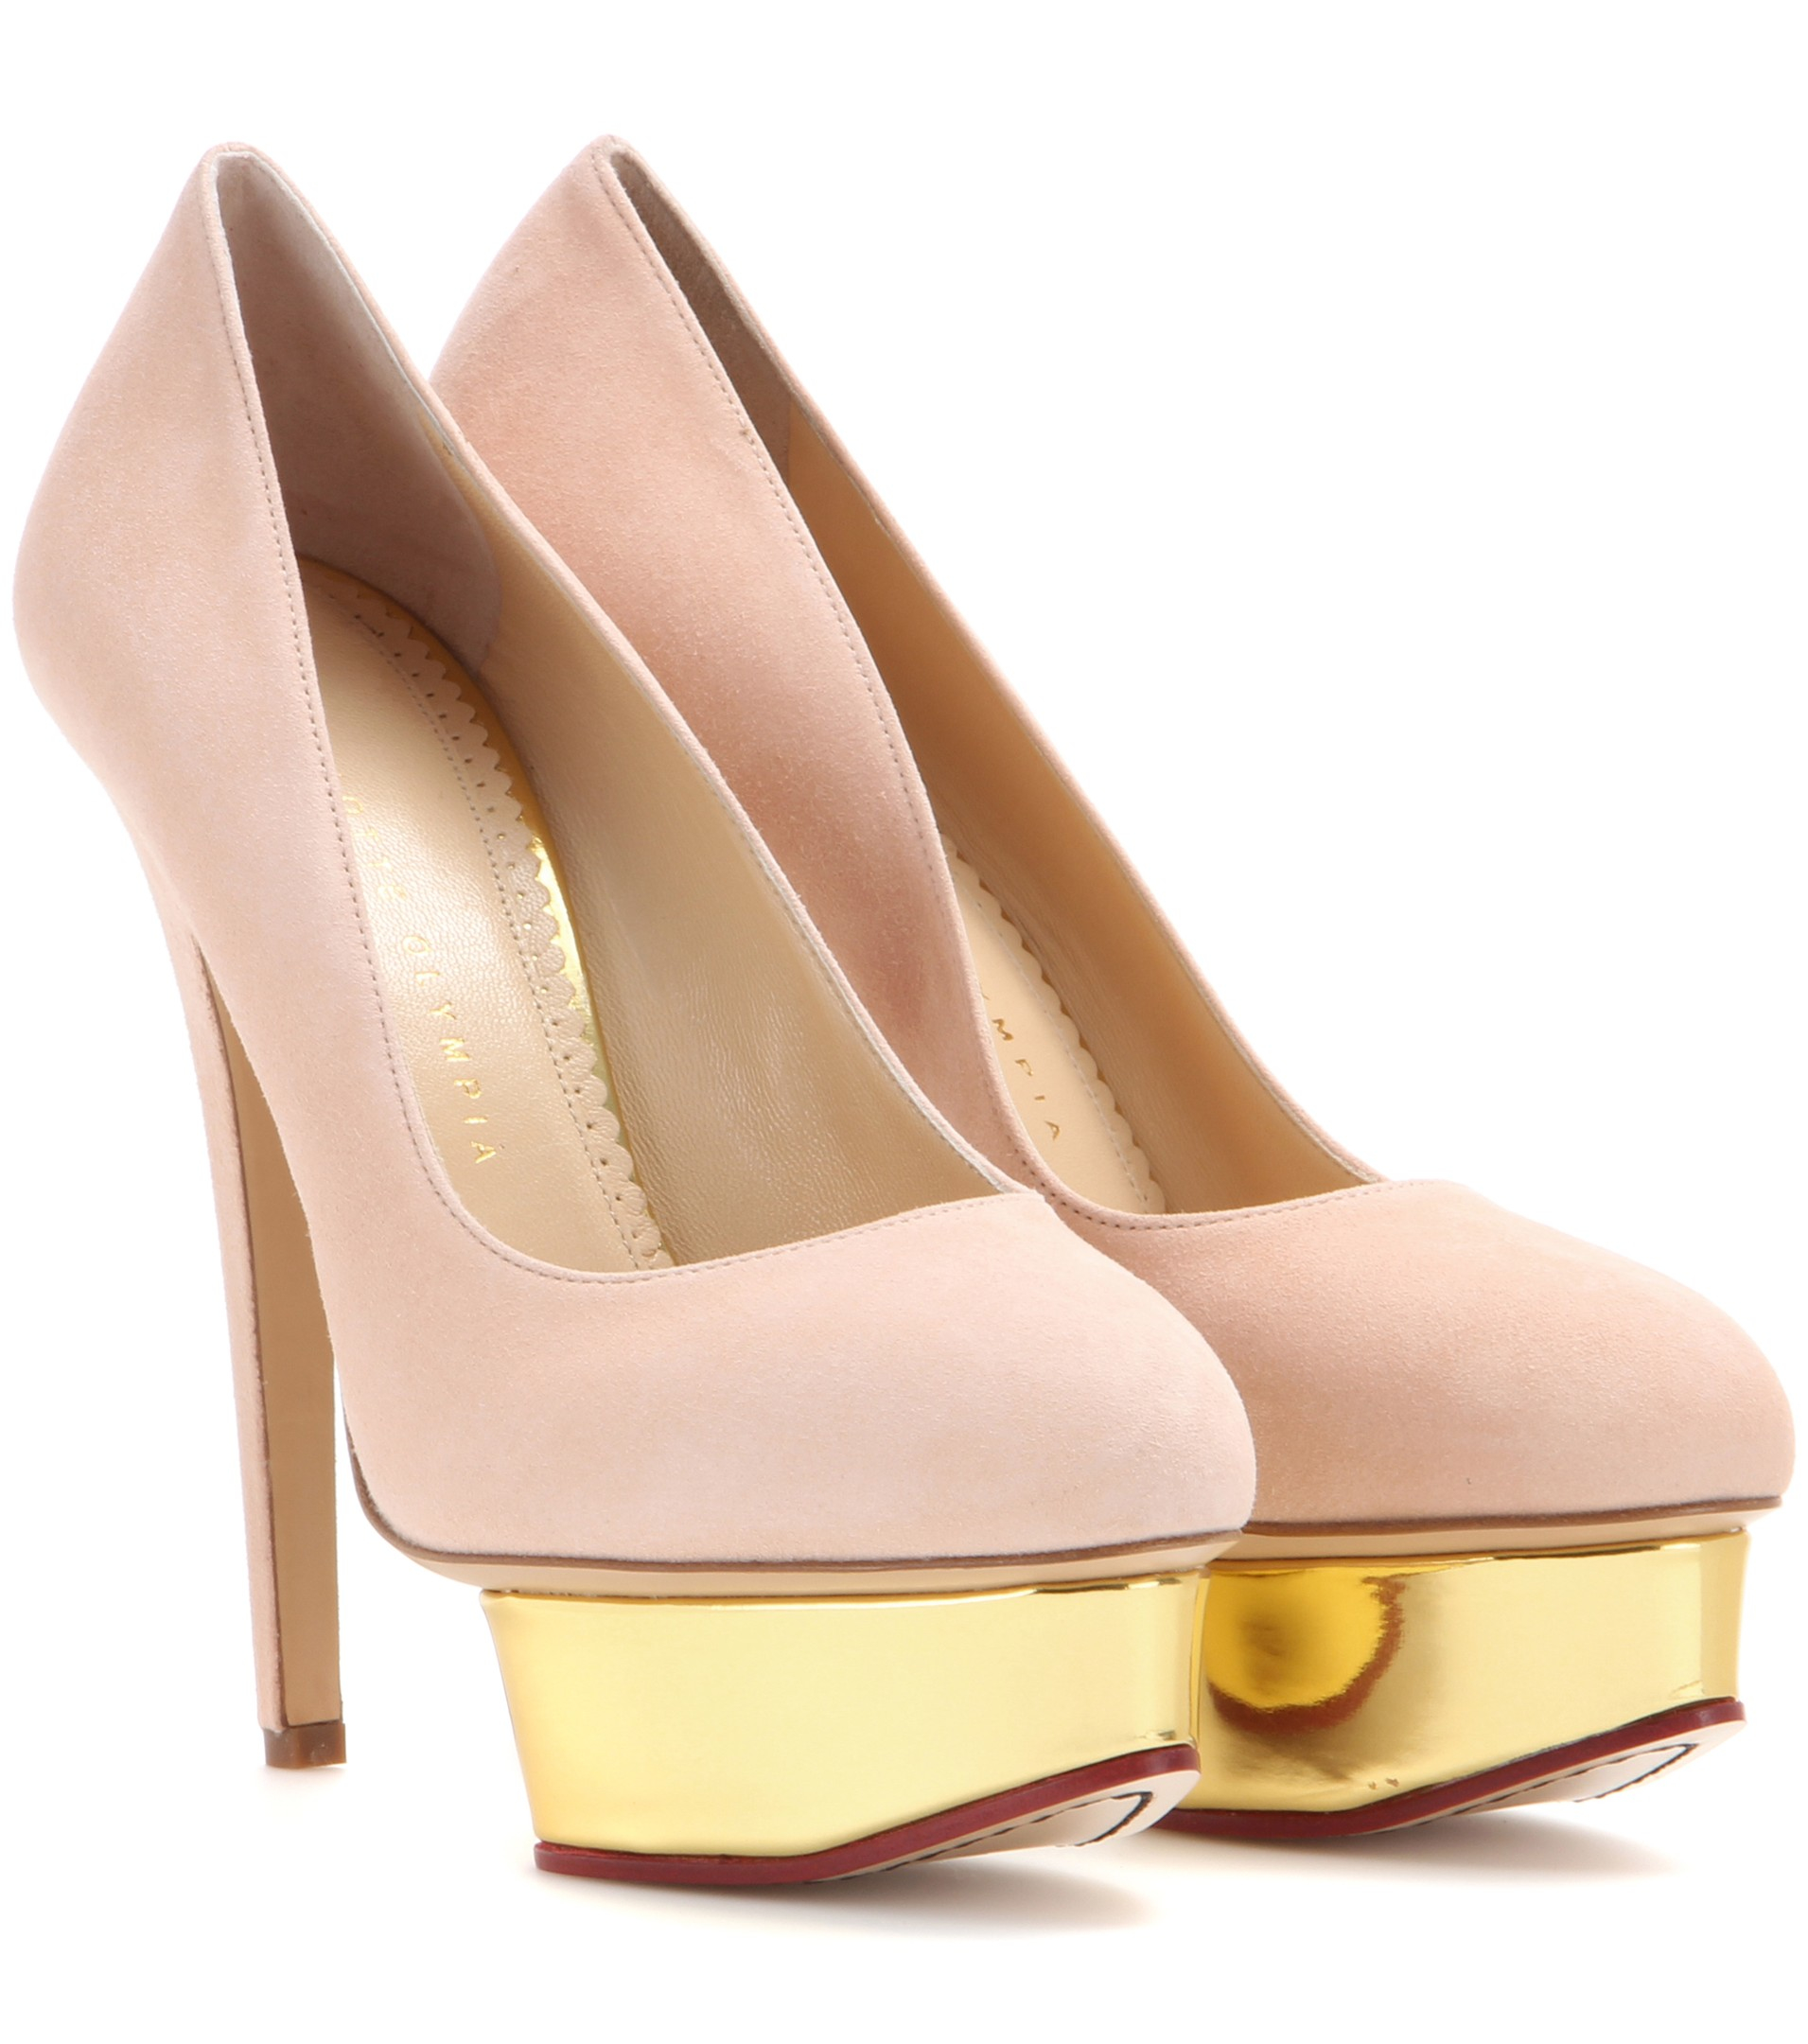 Charlotte Olympia Dolly Suede Platform Pumps in Blush/Gold (Pink) - Lyst